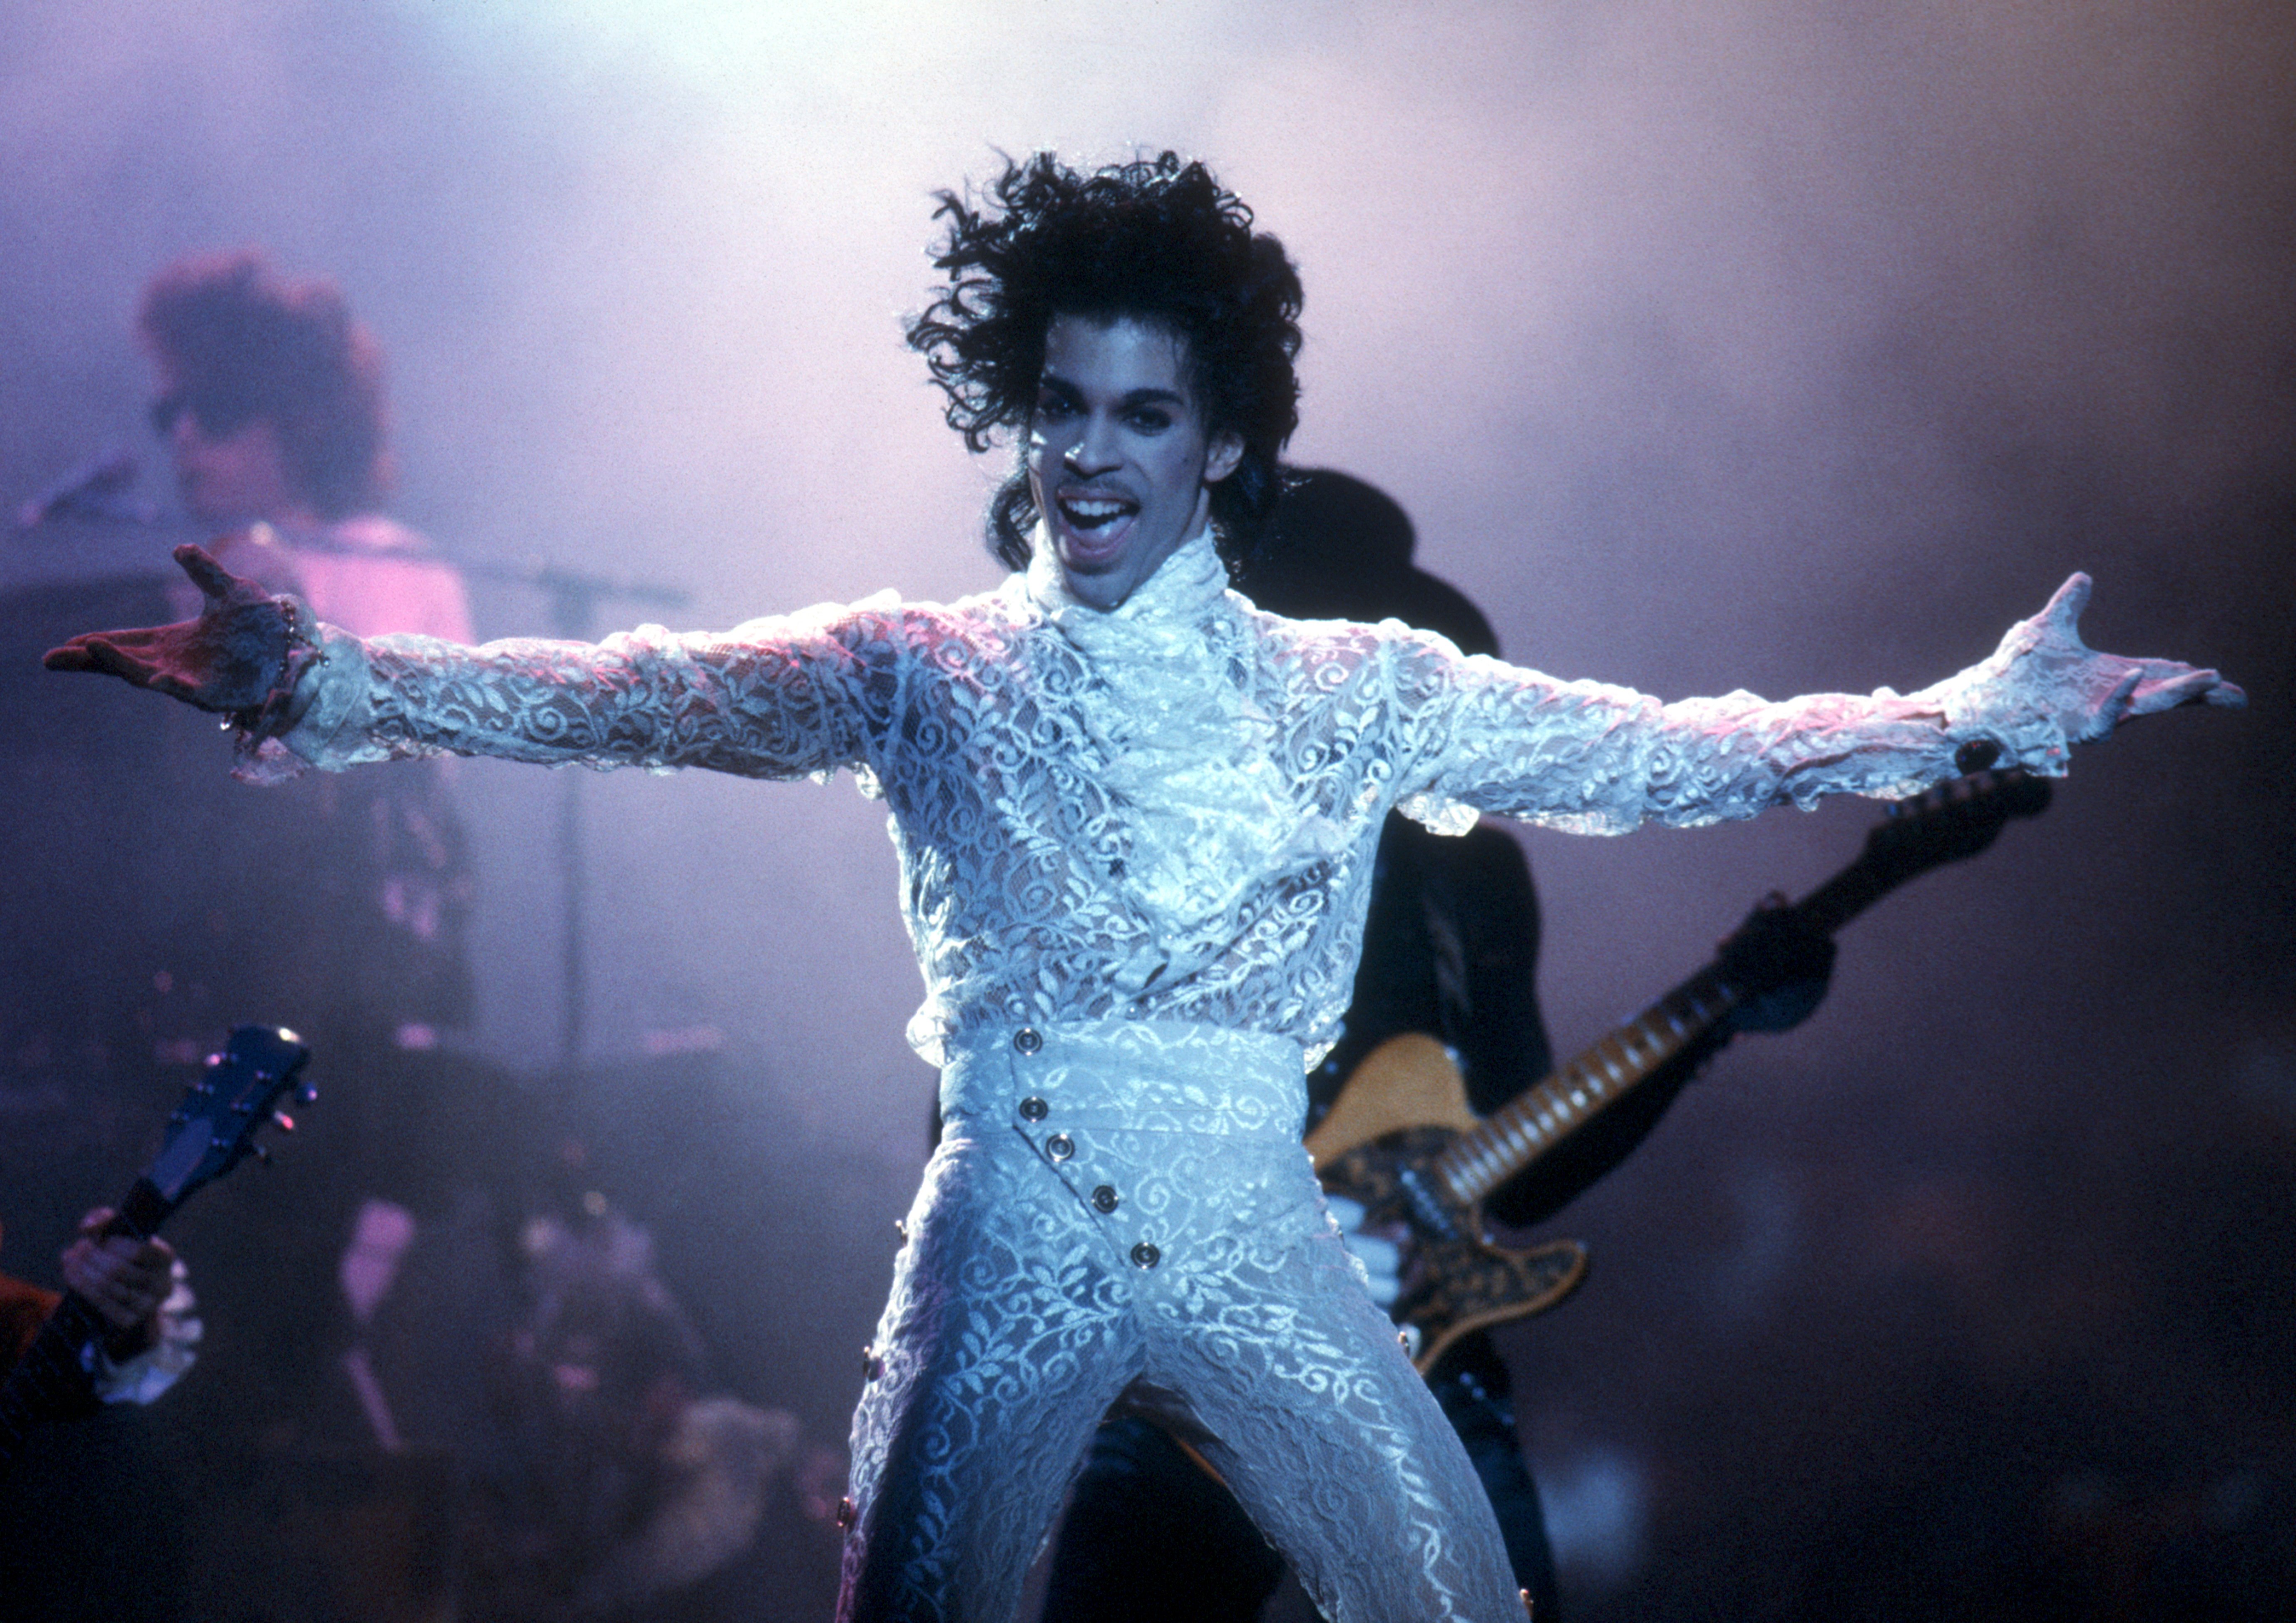 Prince performs live at the Fabulous Forum on February 19, 1985 in Inglewood, California. | Photo: Getty Images